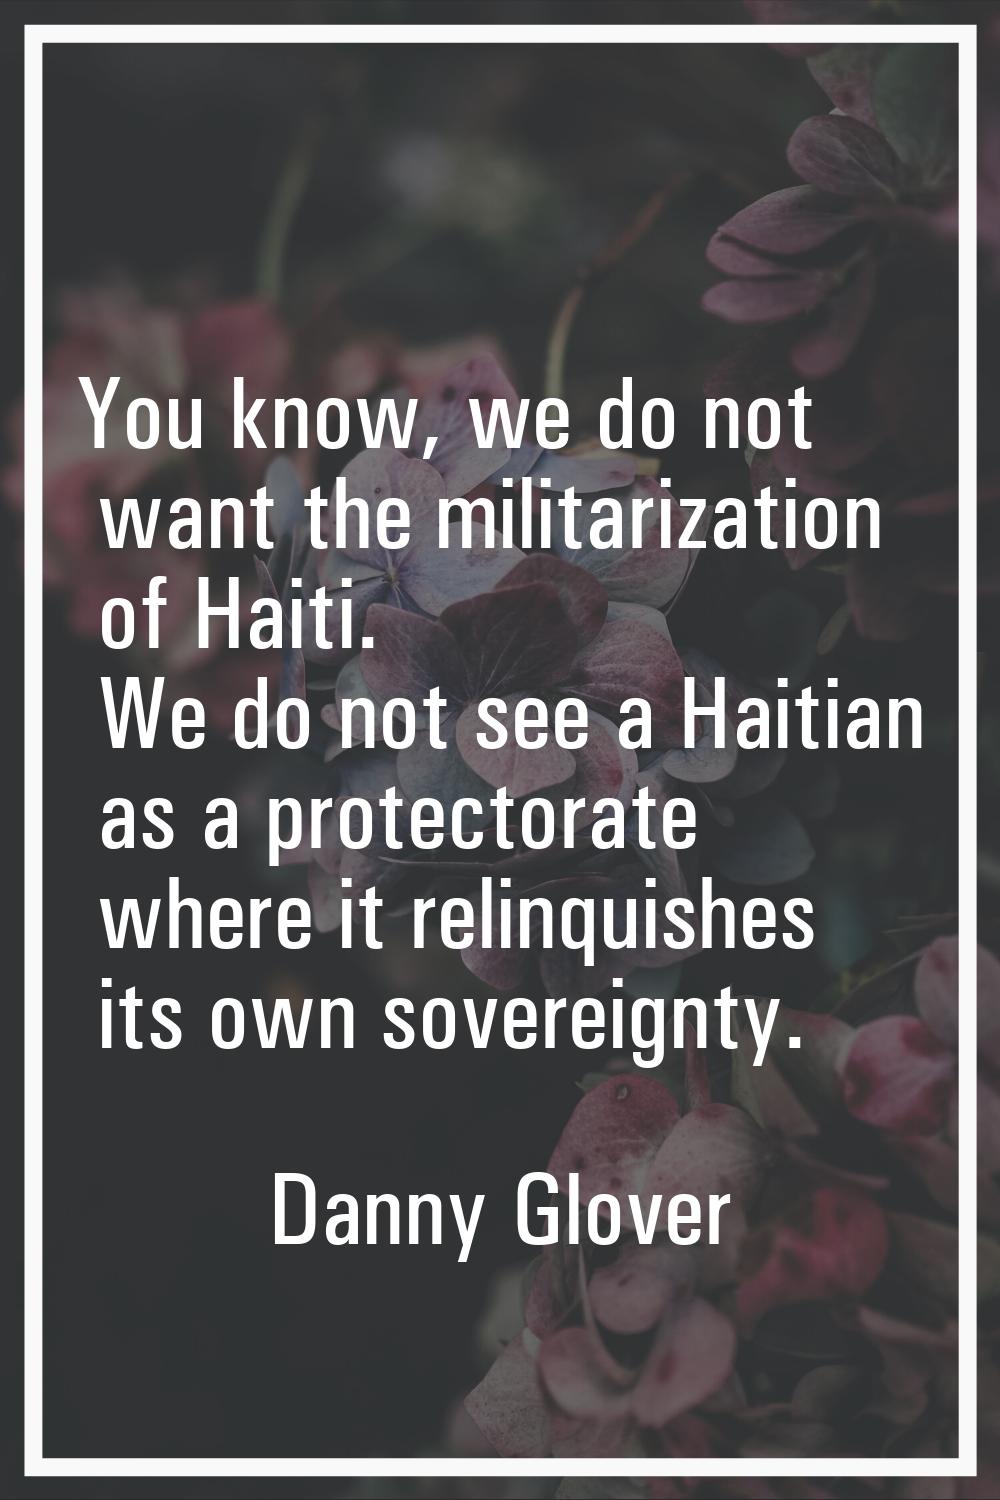 You know, we do not want the militarization of Haiti. We do not see a Haitian as a protectorate whe